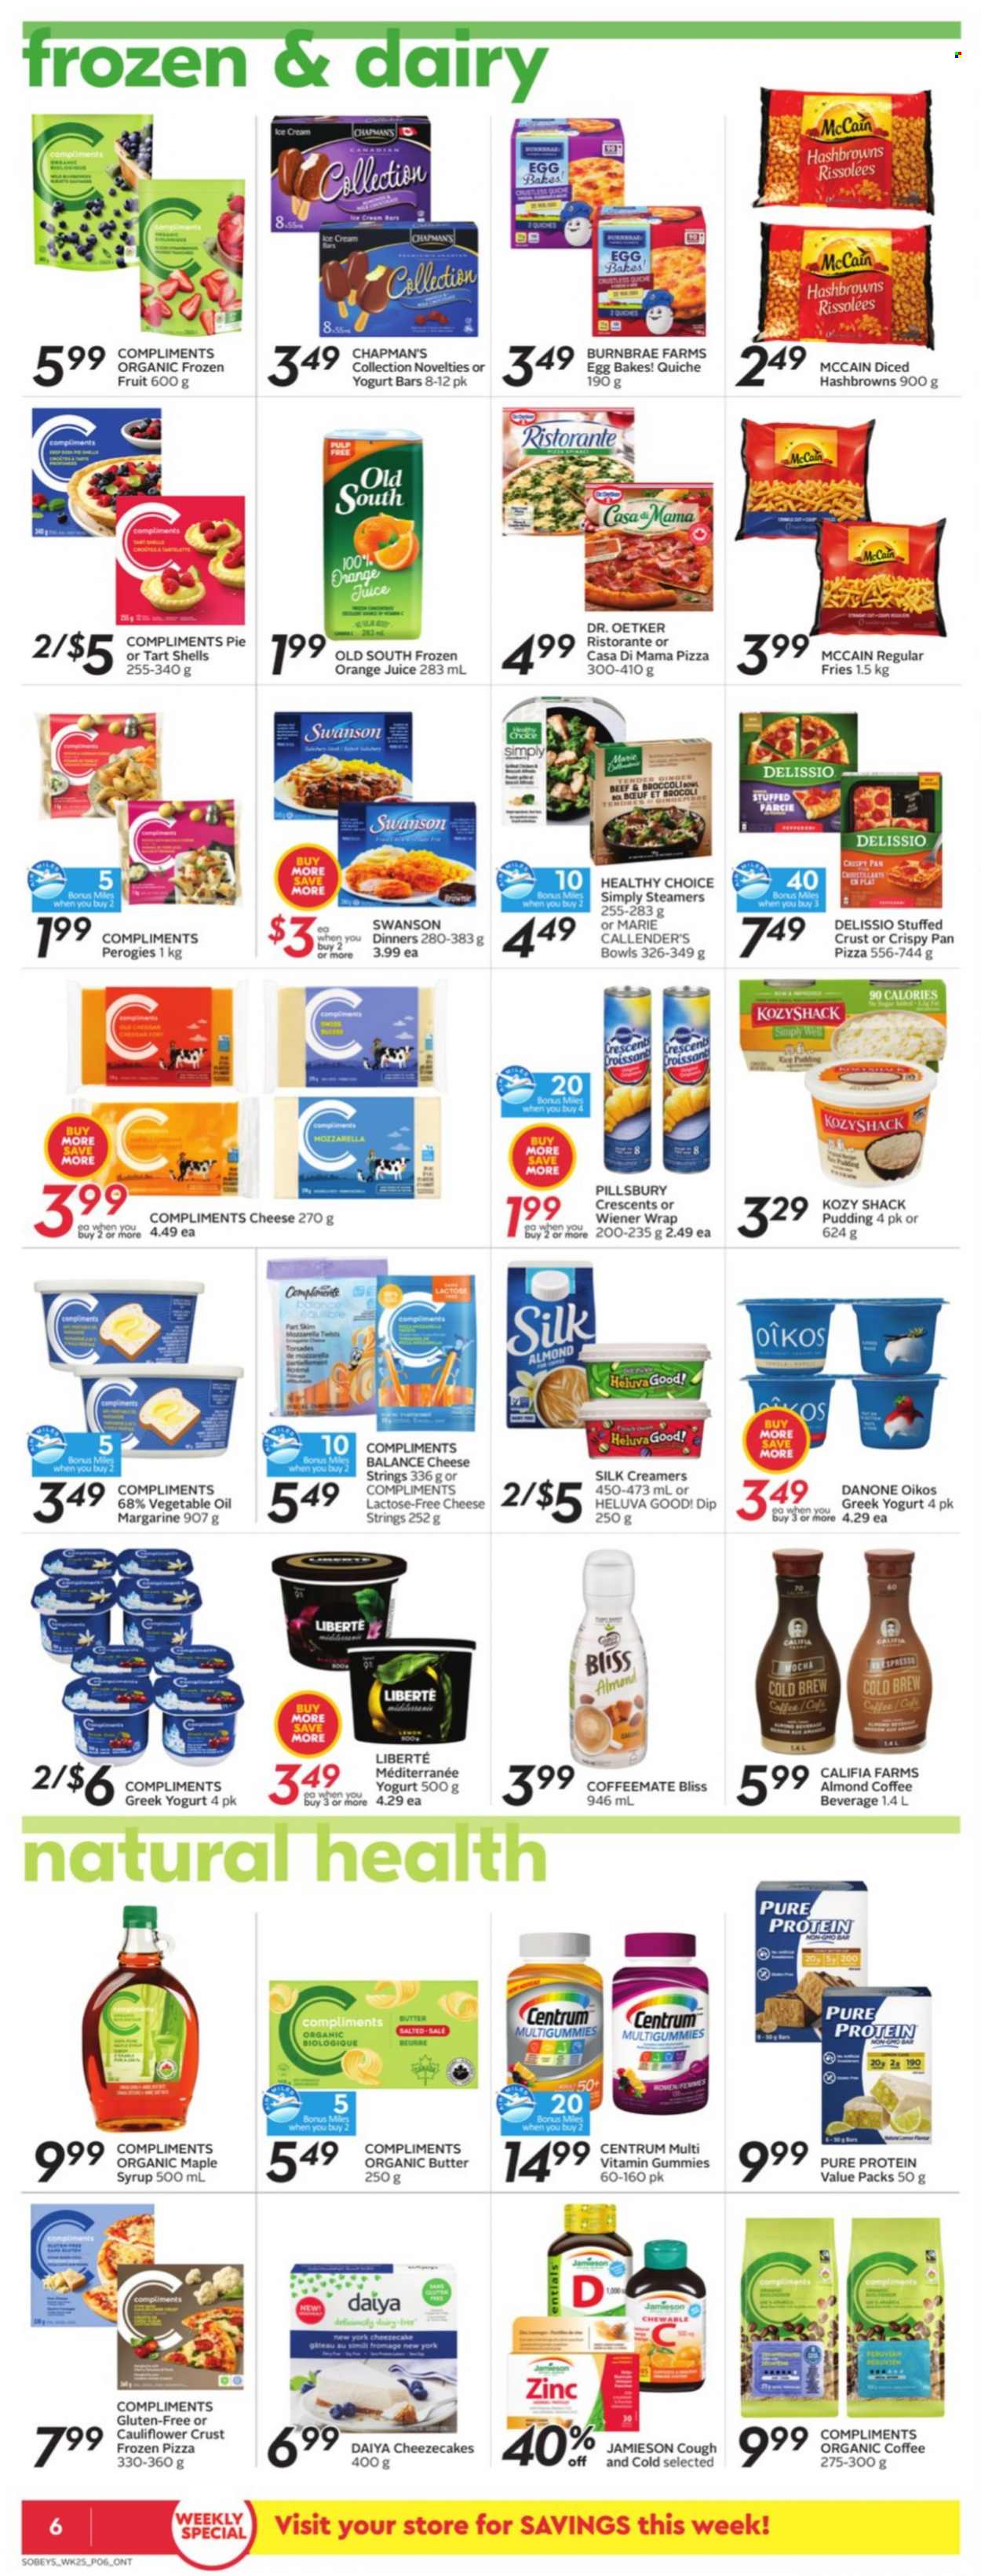 thumbnail - Sobeys Flyer - October 14, 2021 - October 20, 2021 - Sales products - pie, broccoli, ginger, pizza, Pillsbury, Healthy Choice, Marie Callender's, Dr. Oetker, greek yoghurt, pudding, Oikos, Silk, eggs, butter, margarine, dip, ice cream, organic frozen fruit, McCain, hash browns, potato fries, quiche, vegetable oil, oil, maple syrup, syrup, orange juice, juice, organic coffee, Jameson, zinc, Centrum, Danone. Page 7.